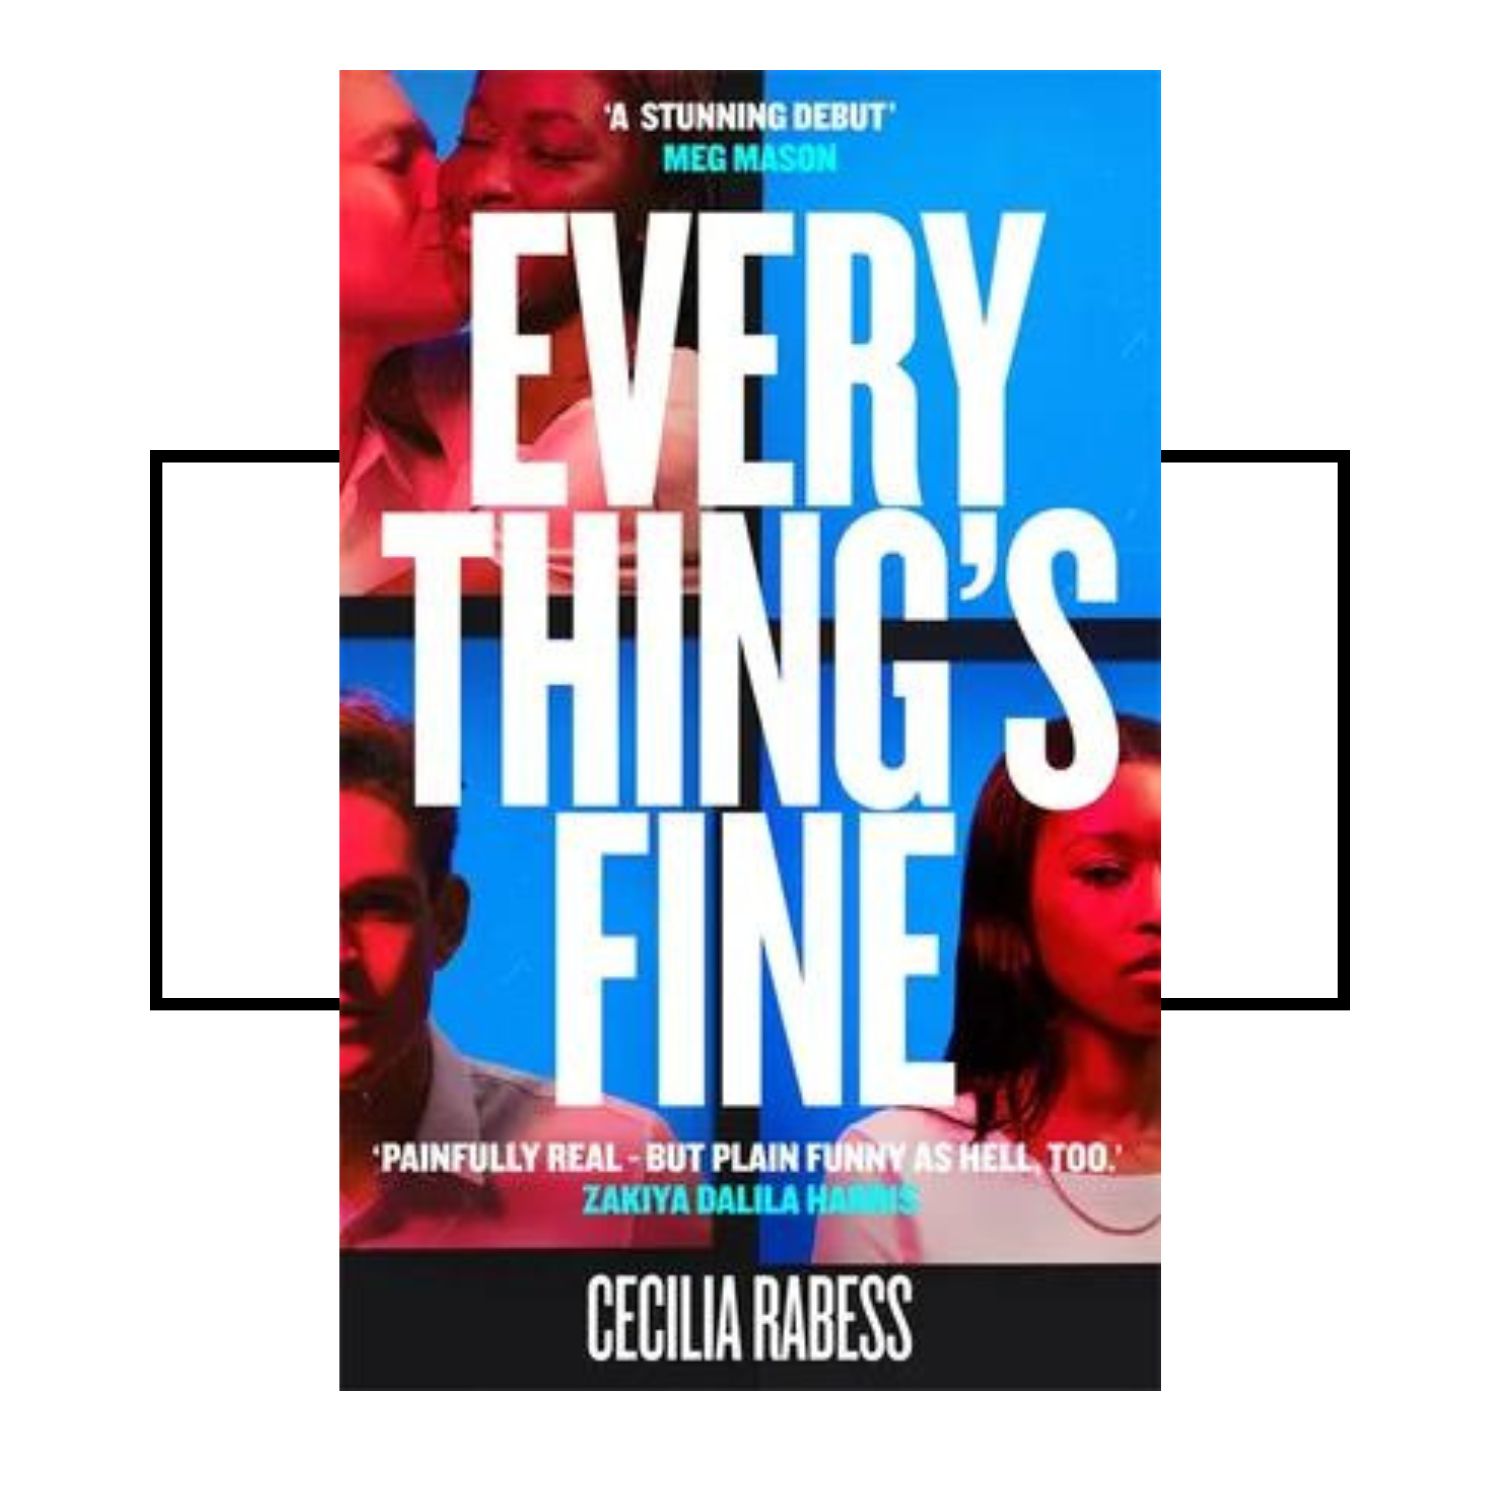 Image of the cover for the book, Everything